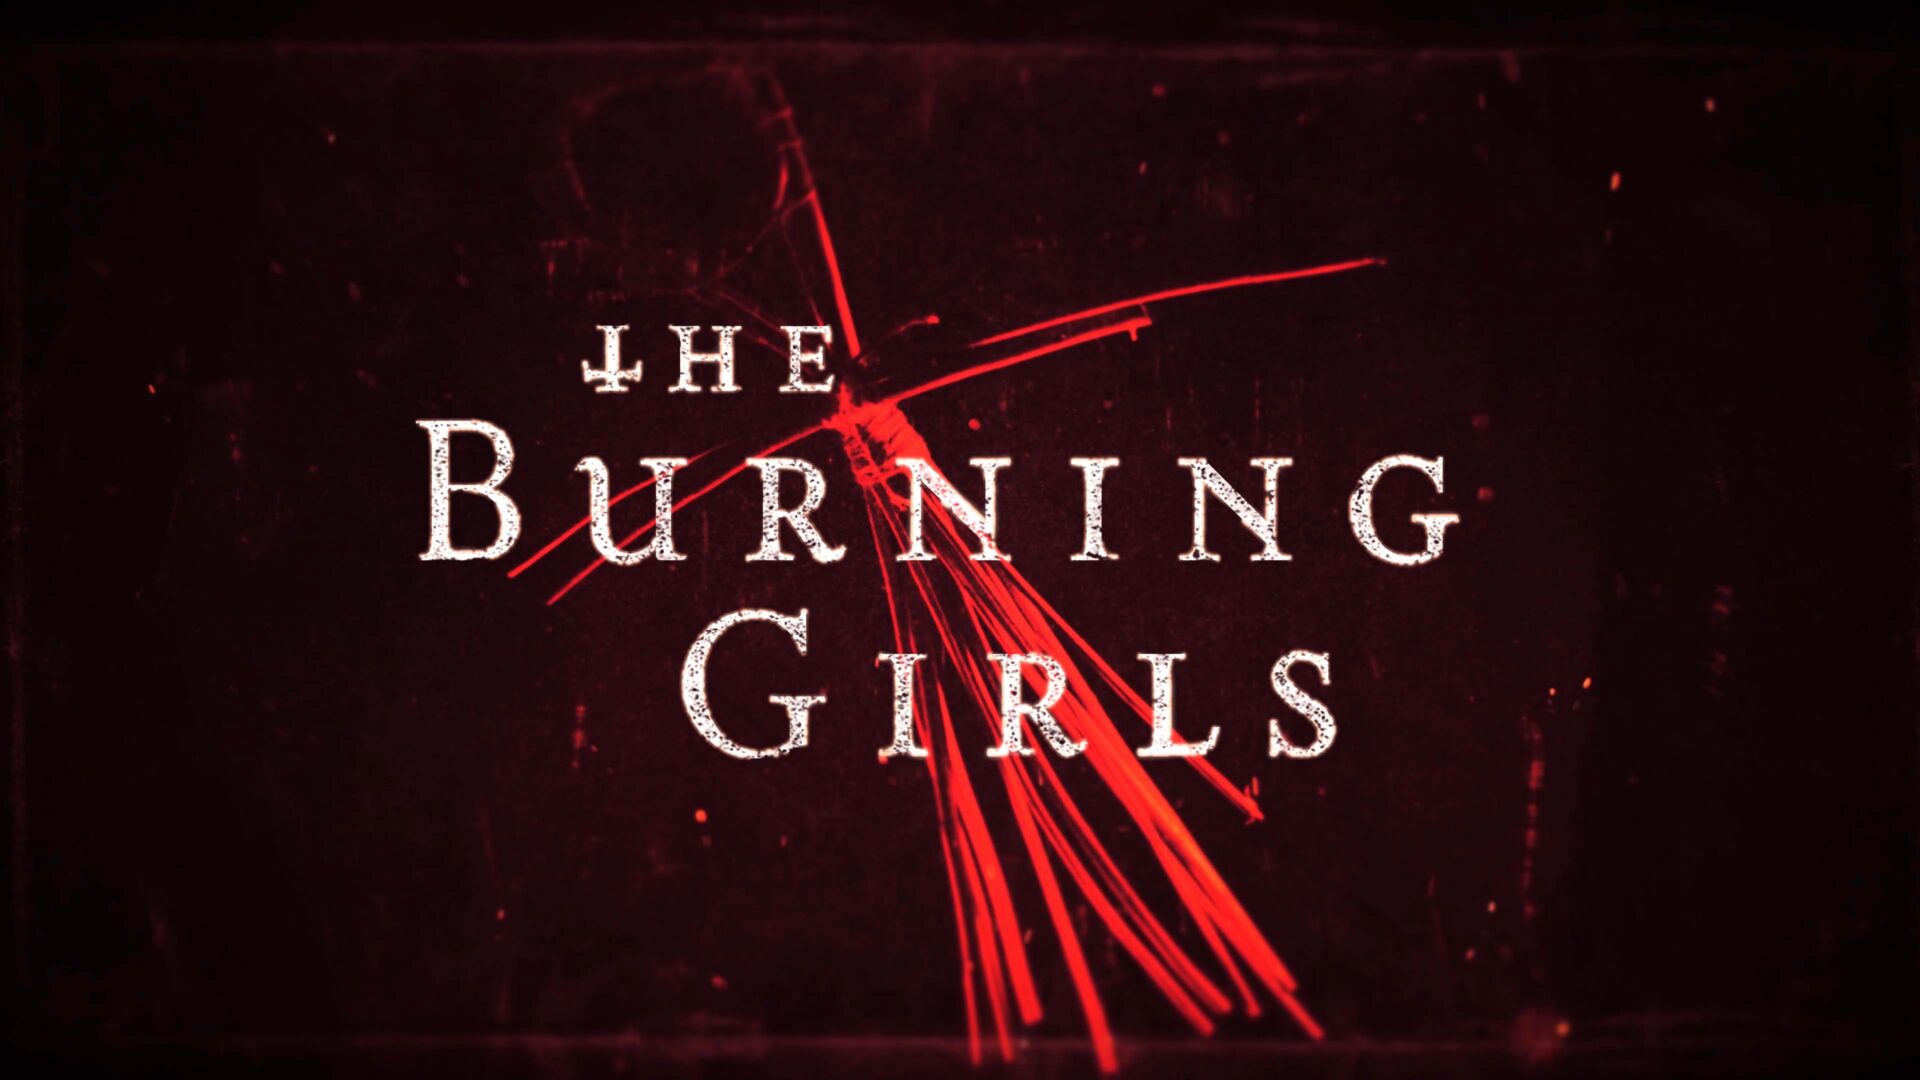 Peter_Anderson_Studio-The_Burning_Girls-Title_Sequence_28